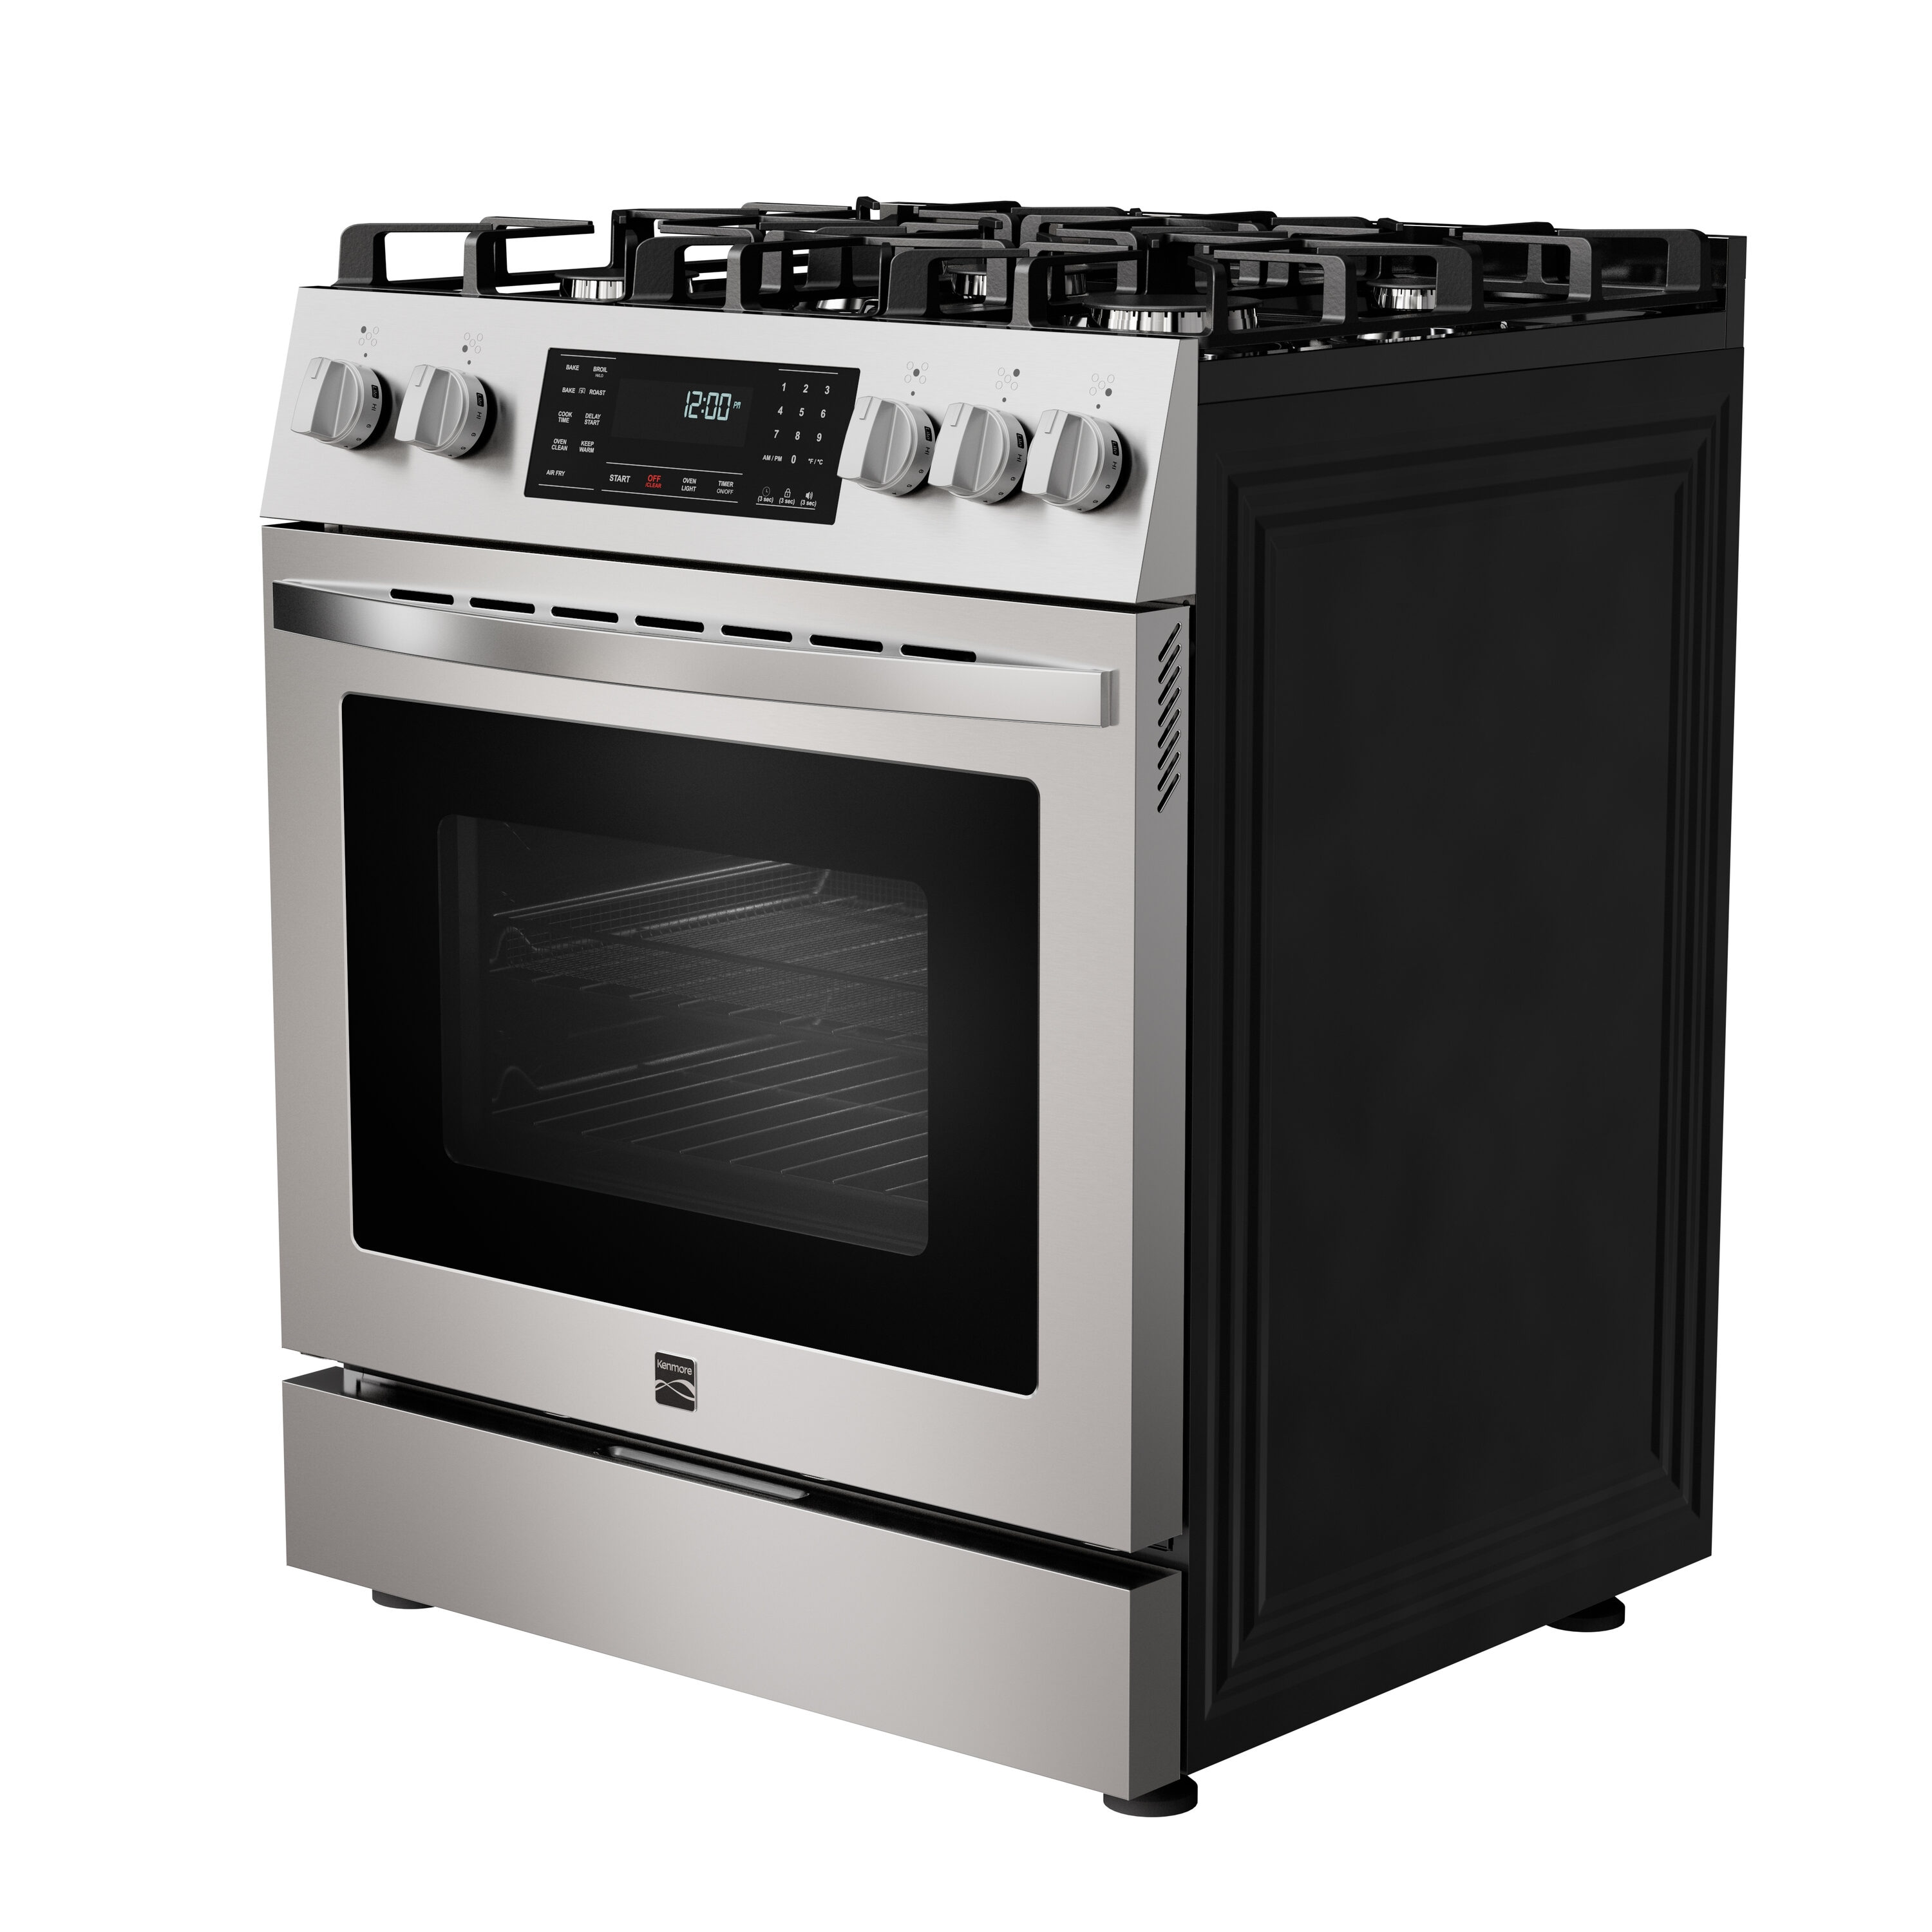 DR202BSSGLP in Stainless Steel by Danby in Bangor, ME - Danby 20 Wide Gas  Range in Stainless Steel